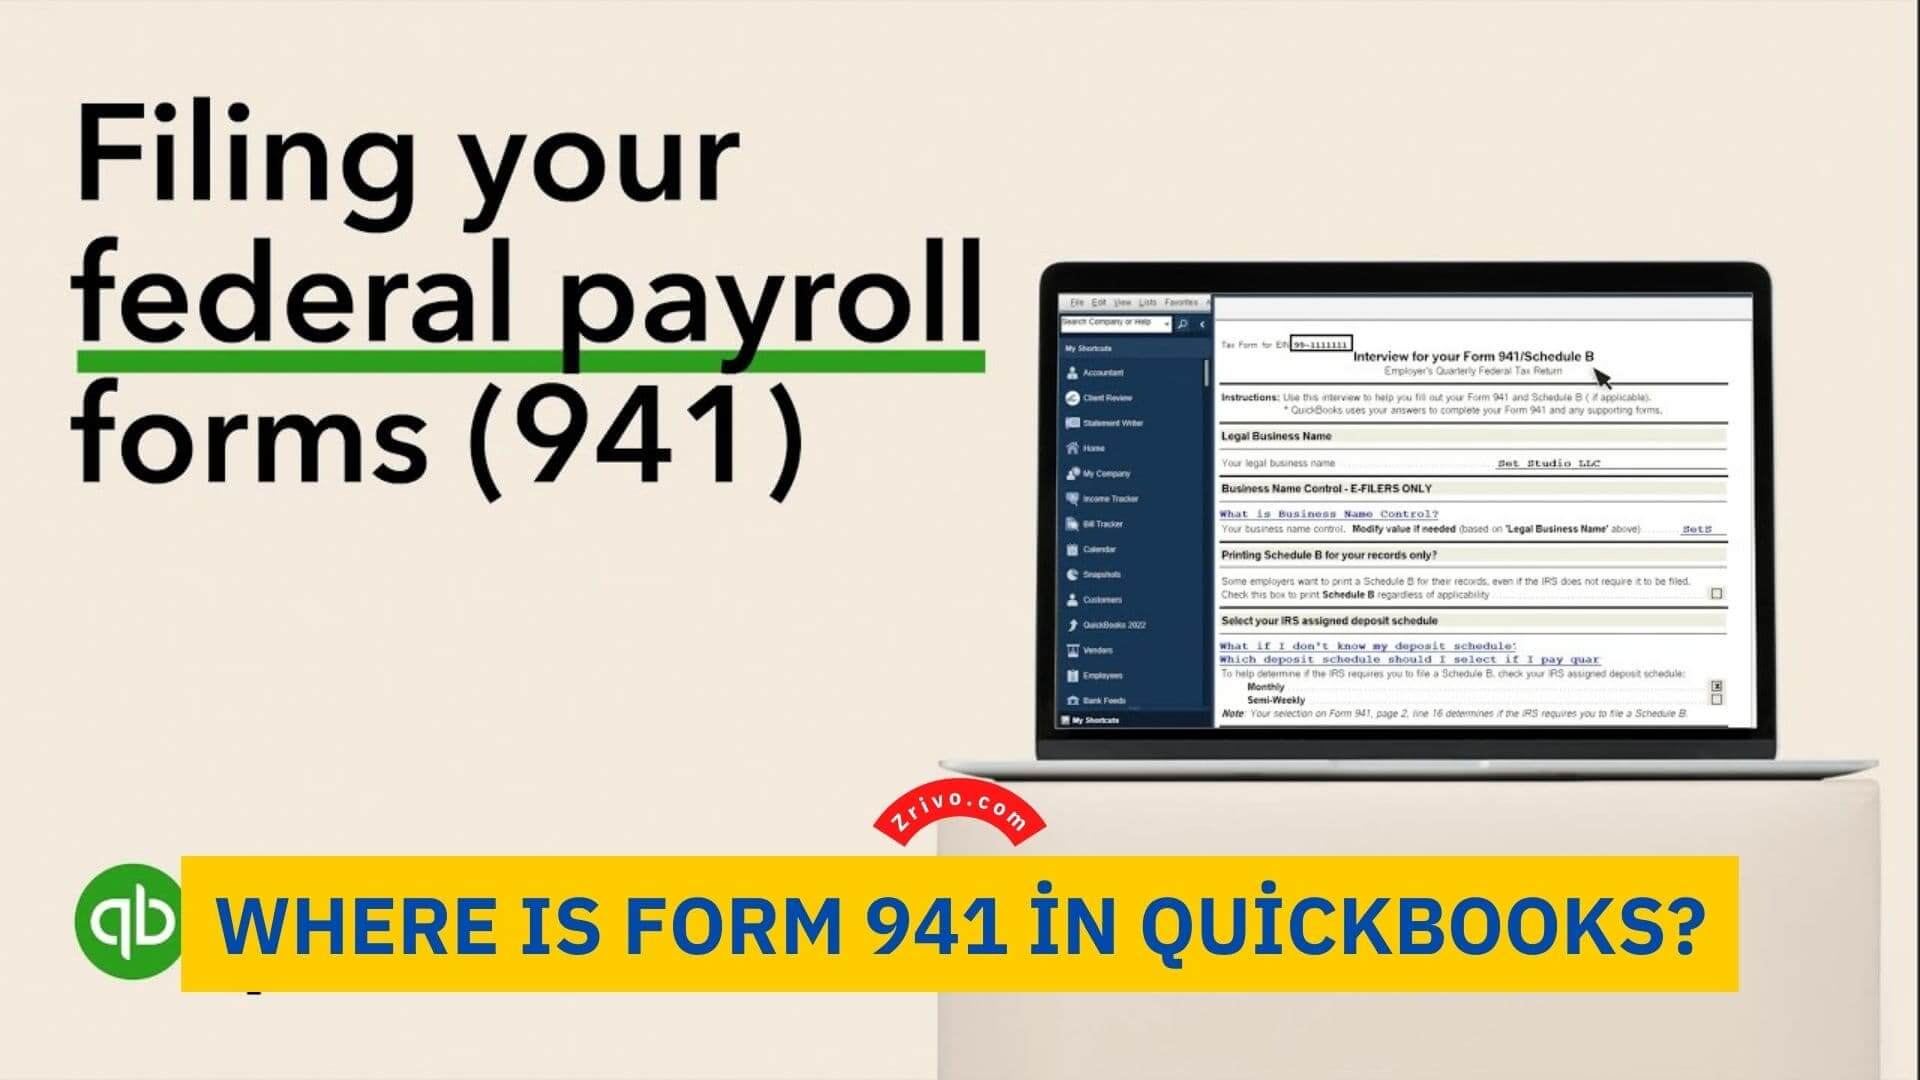 Where Is Form 941 in Quickbooks?